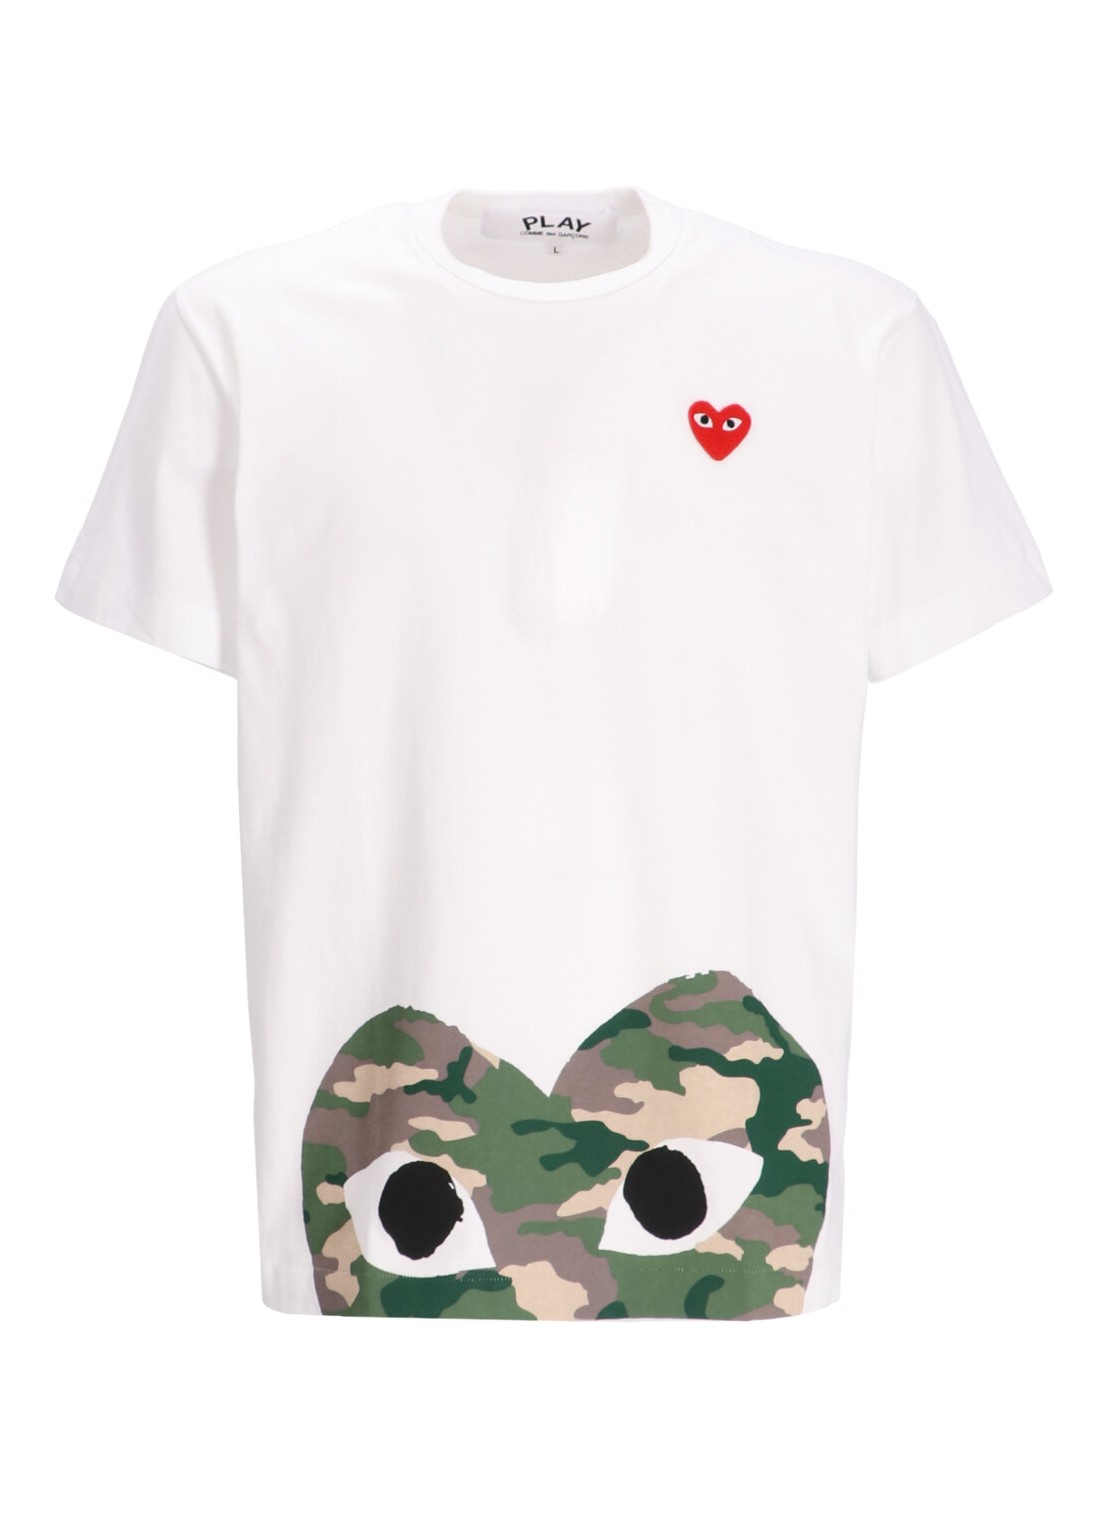 Camiseta comme des garcons t-shirt manplay camouflage t-shirt - axt244051 white talla S
 